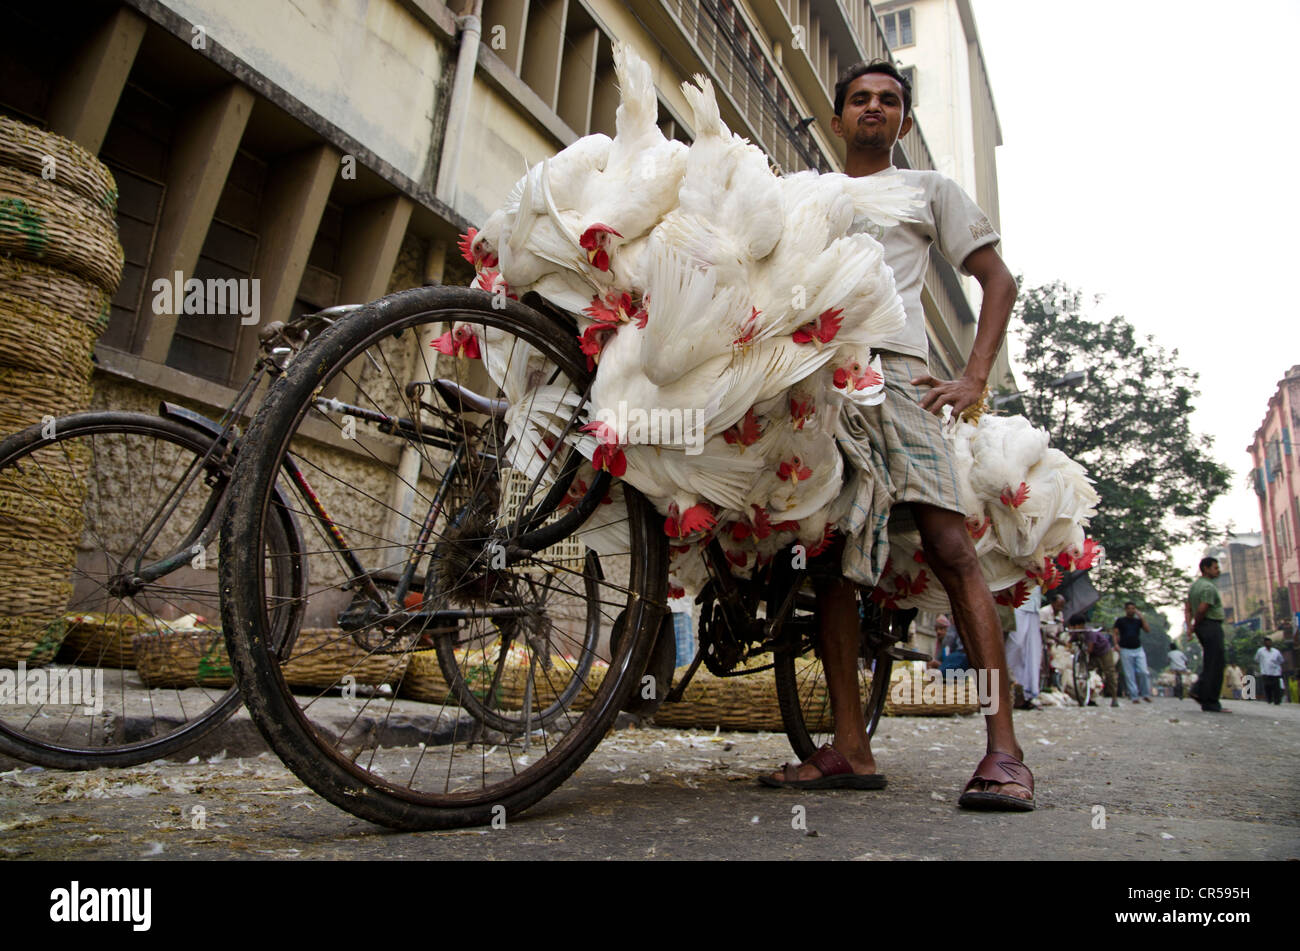 Live chicken being transported on a bicycle, Kolkata, West Bengal, India, Asia Stock Photo